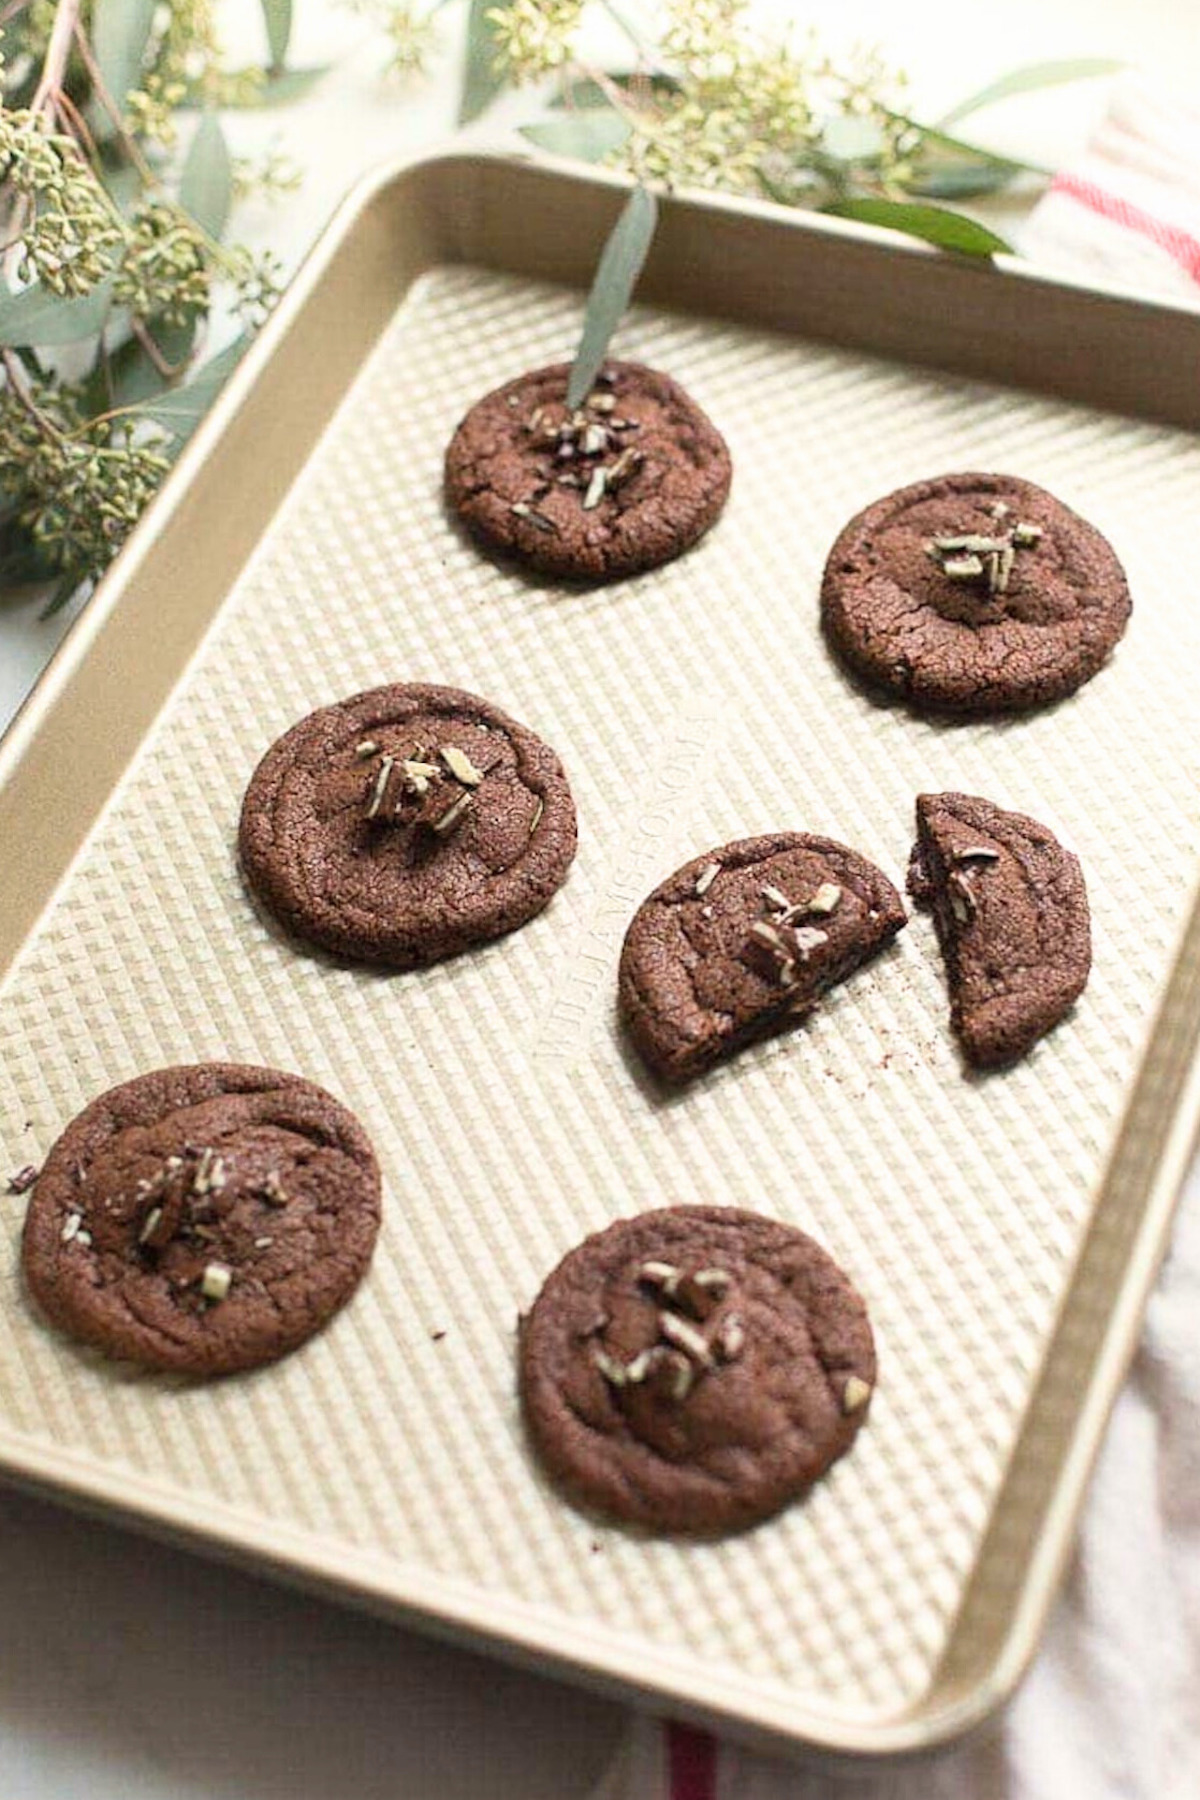 Chocolate cookies on a baking sheet with peppermint flavor.